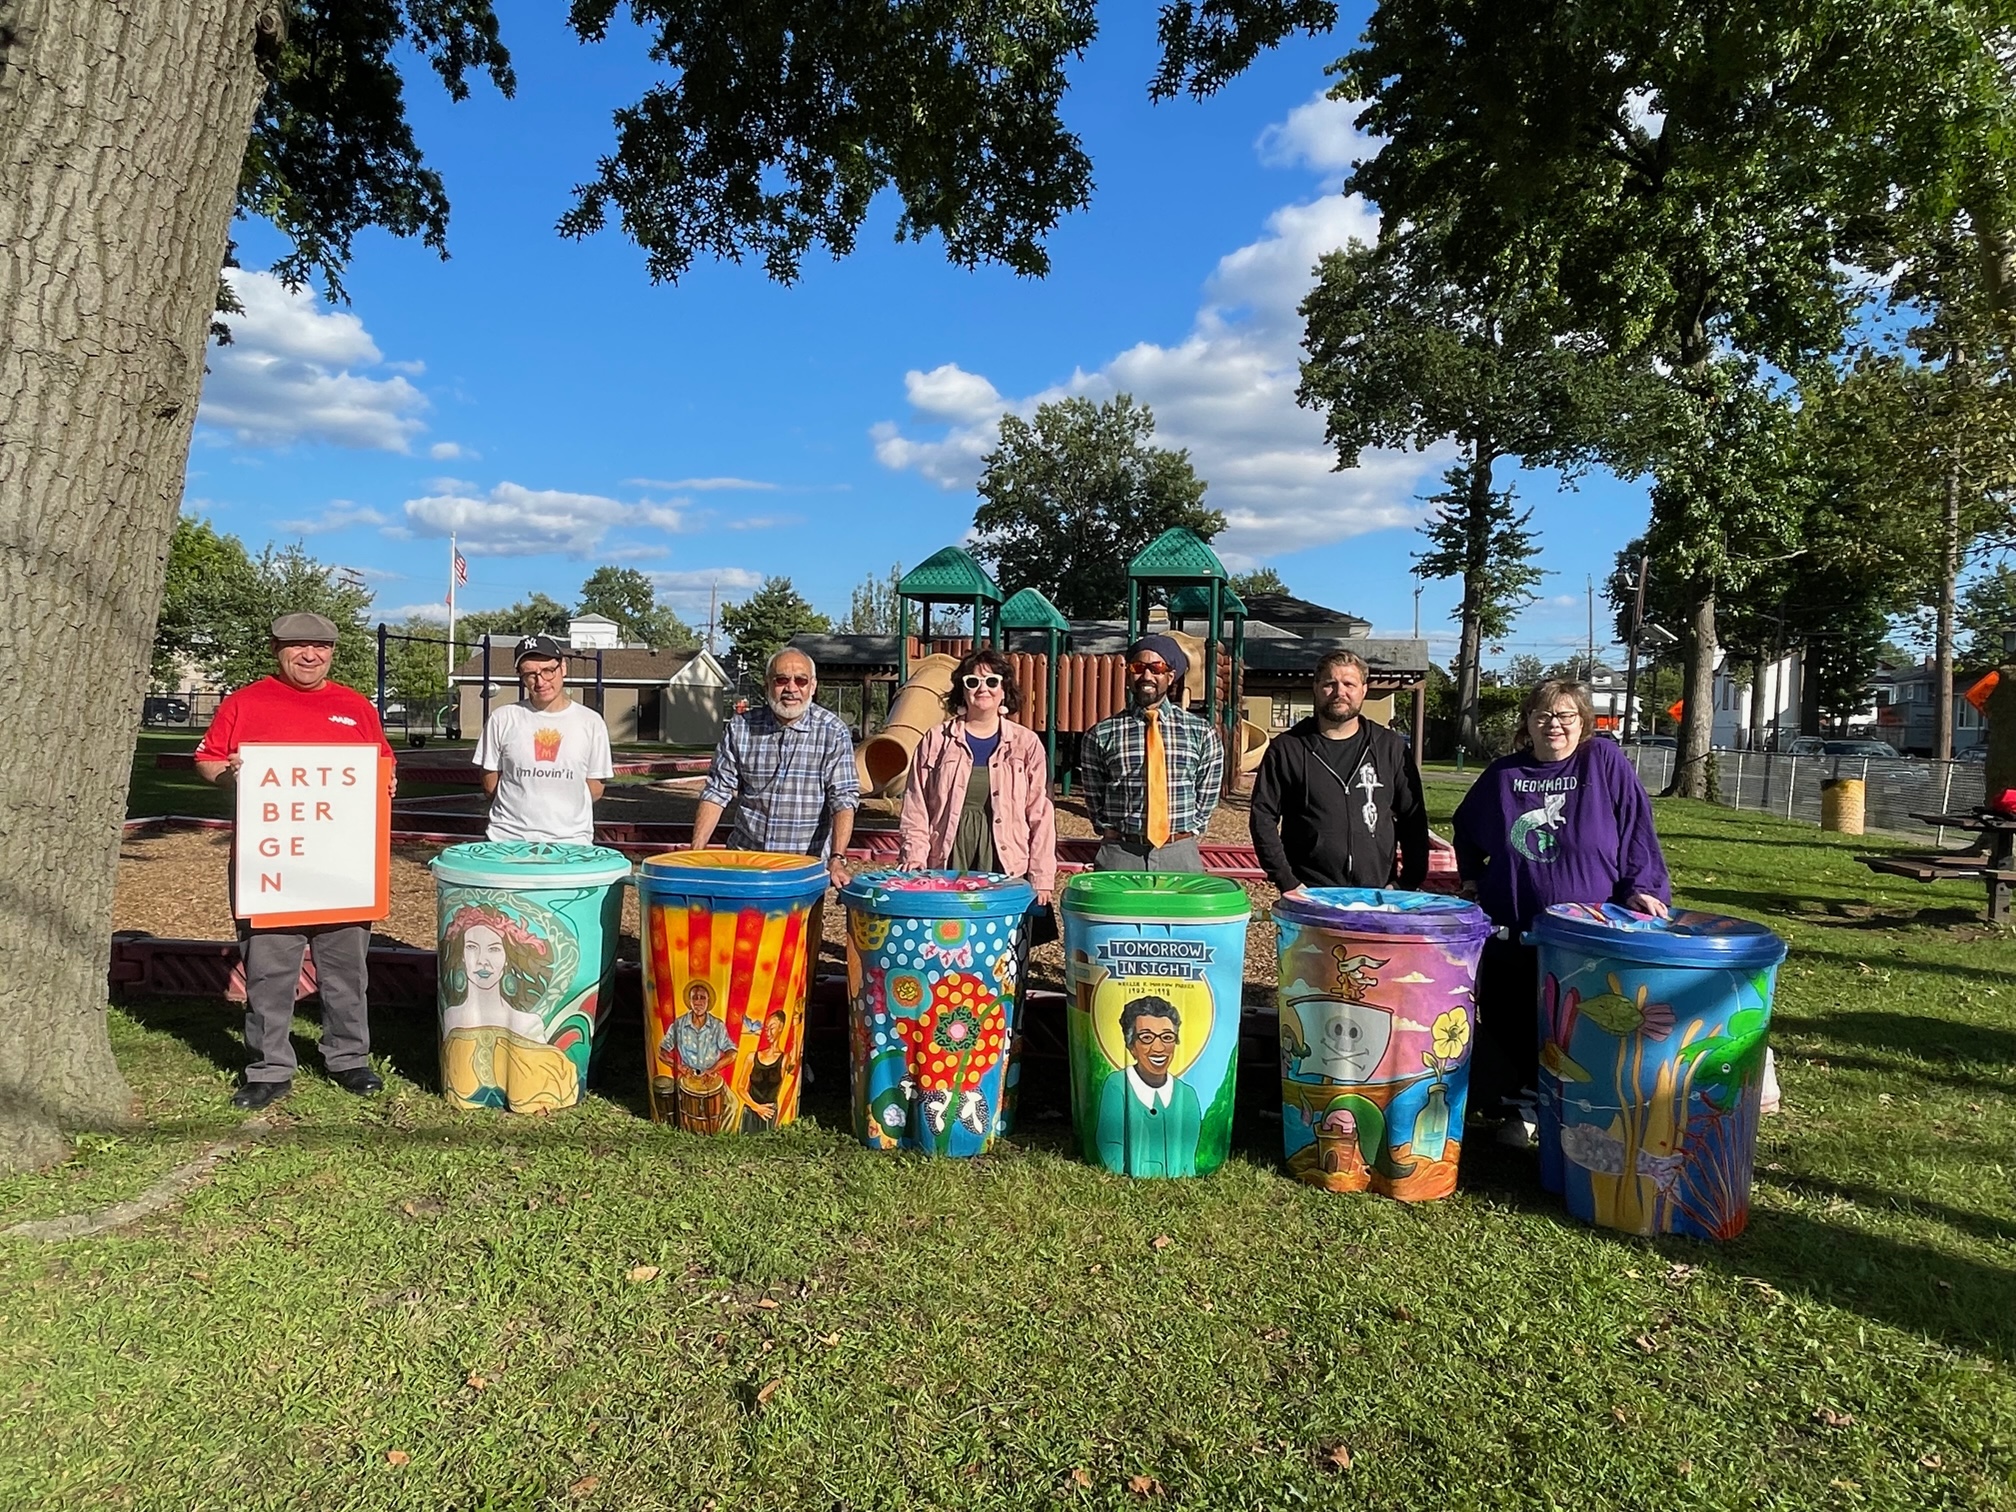 The Northern New Jersey Community Foundation received a PSEG Foundation grant to support the painting and display of rain barrels for flood mitigation in Hackensack.